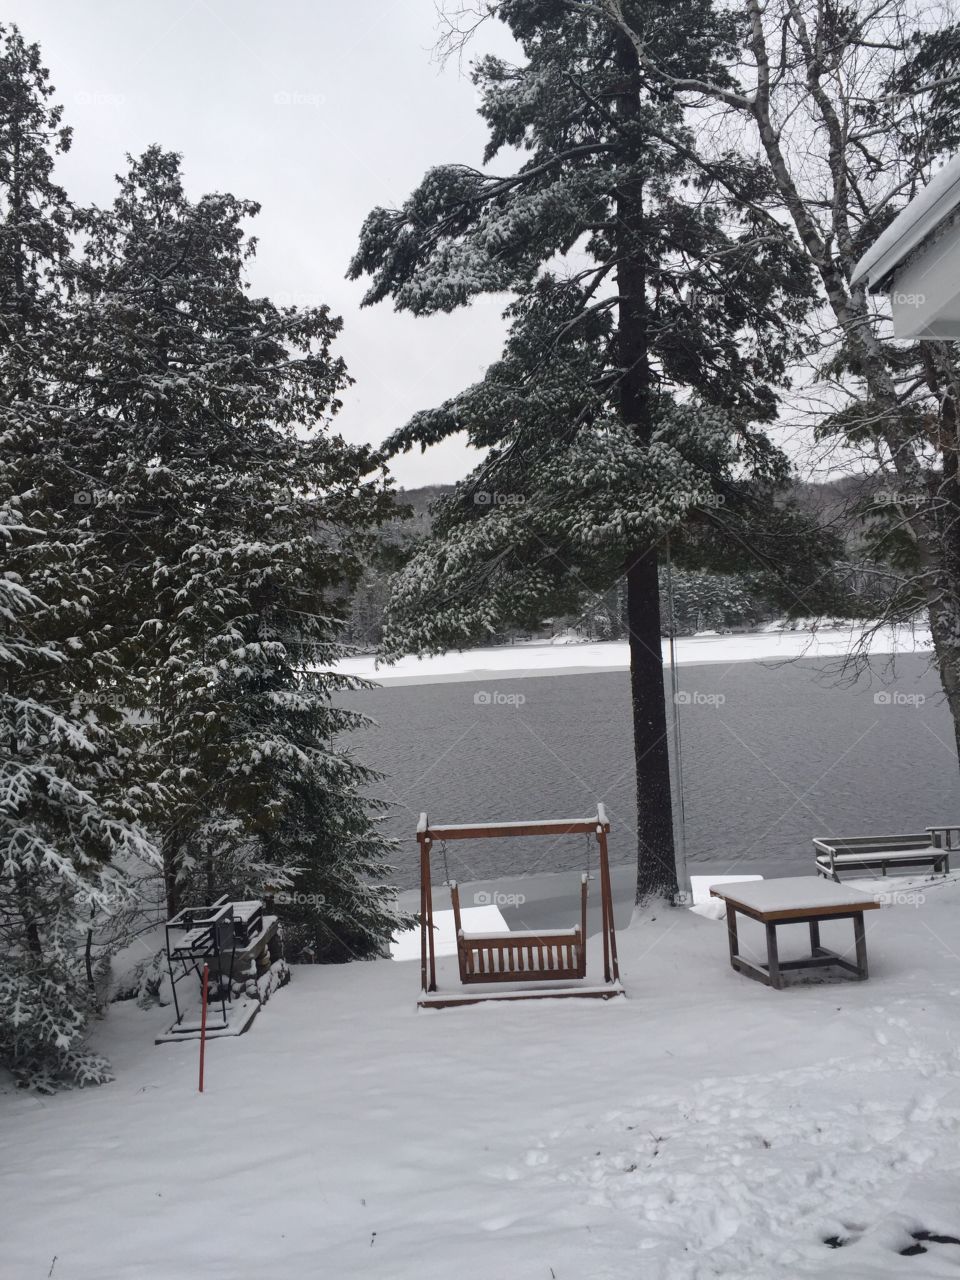 The yard and trees outside a cottage are covered in a blanket of snow. The lake is not yet frozen.